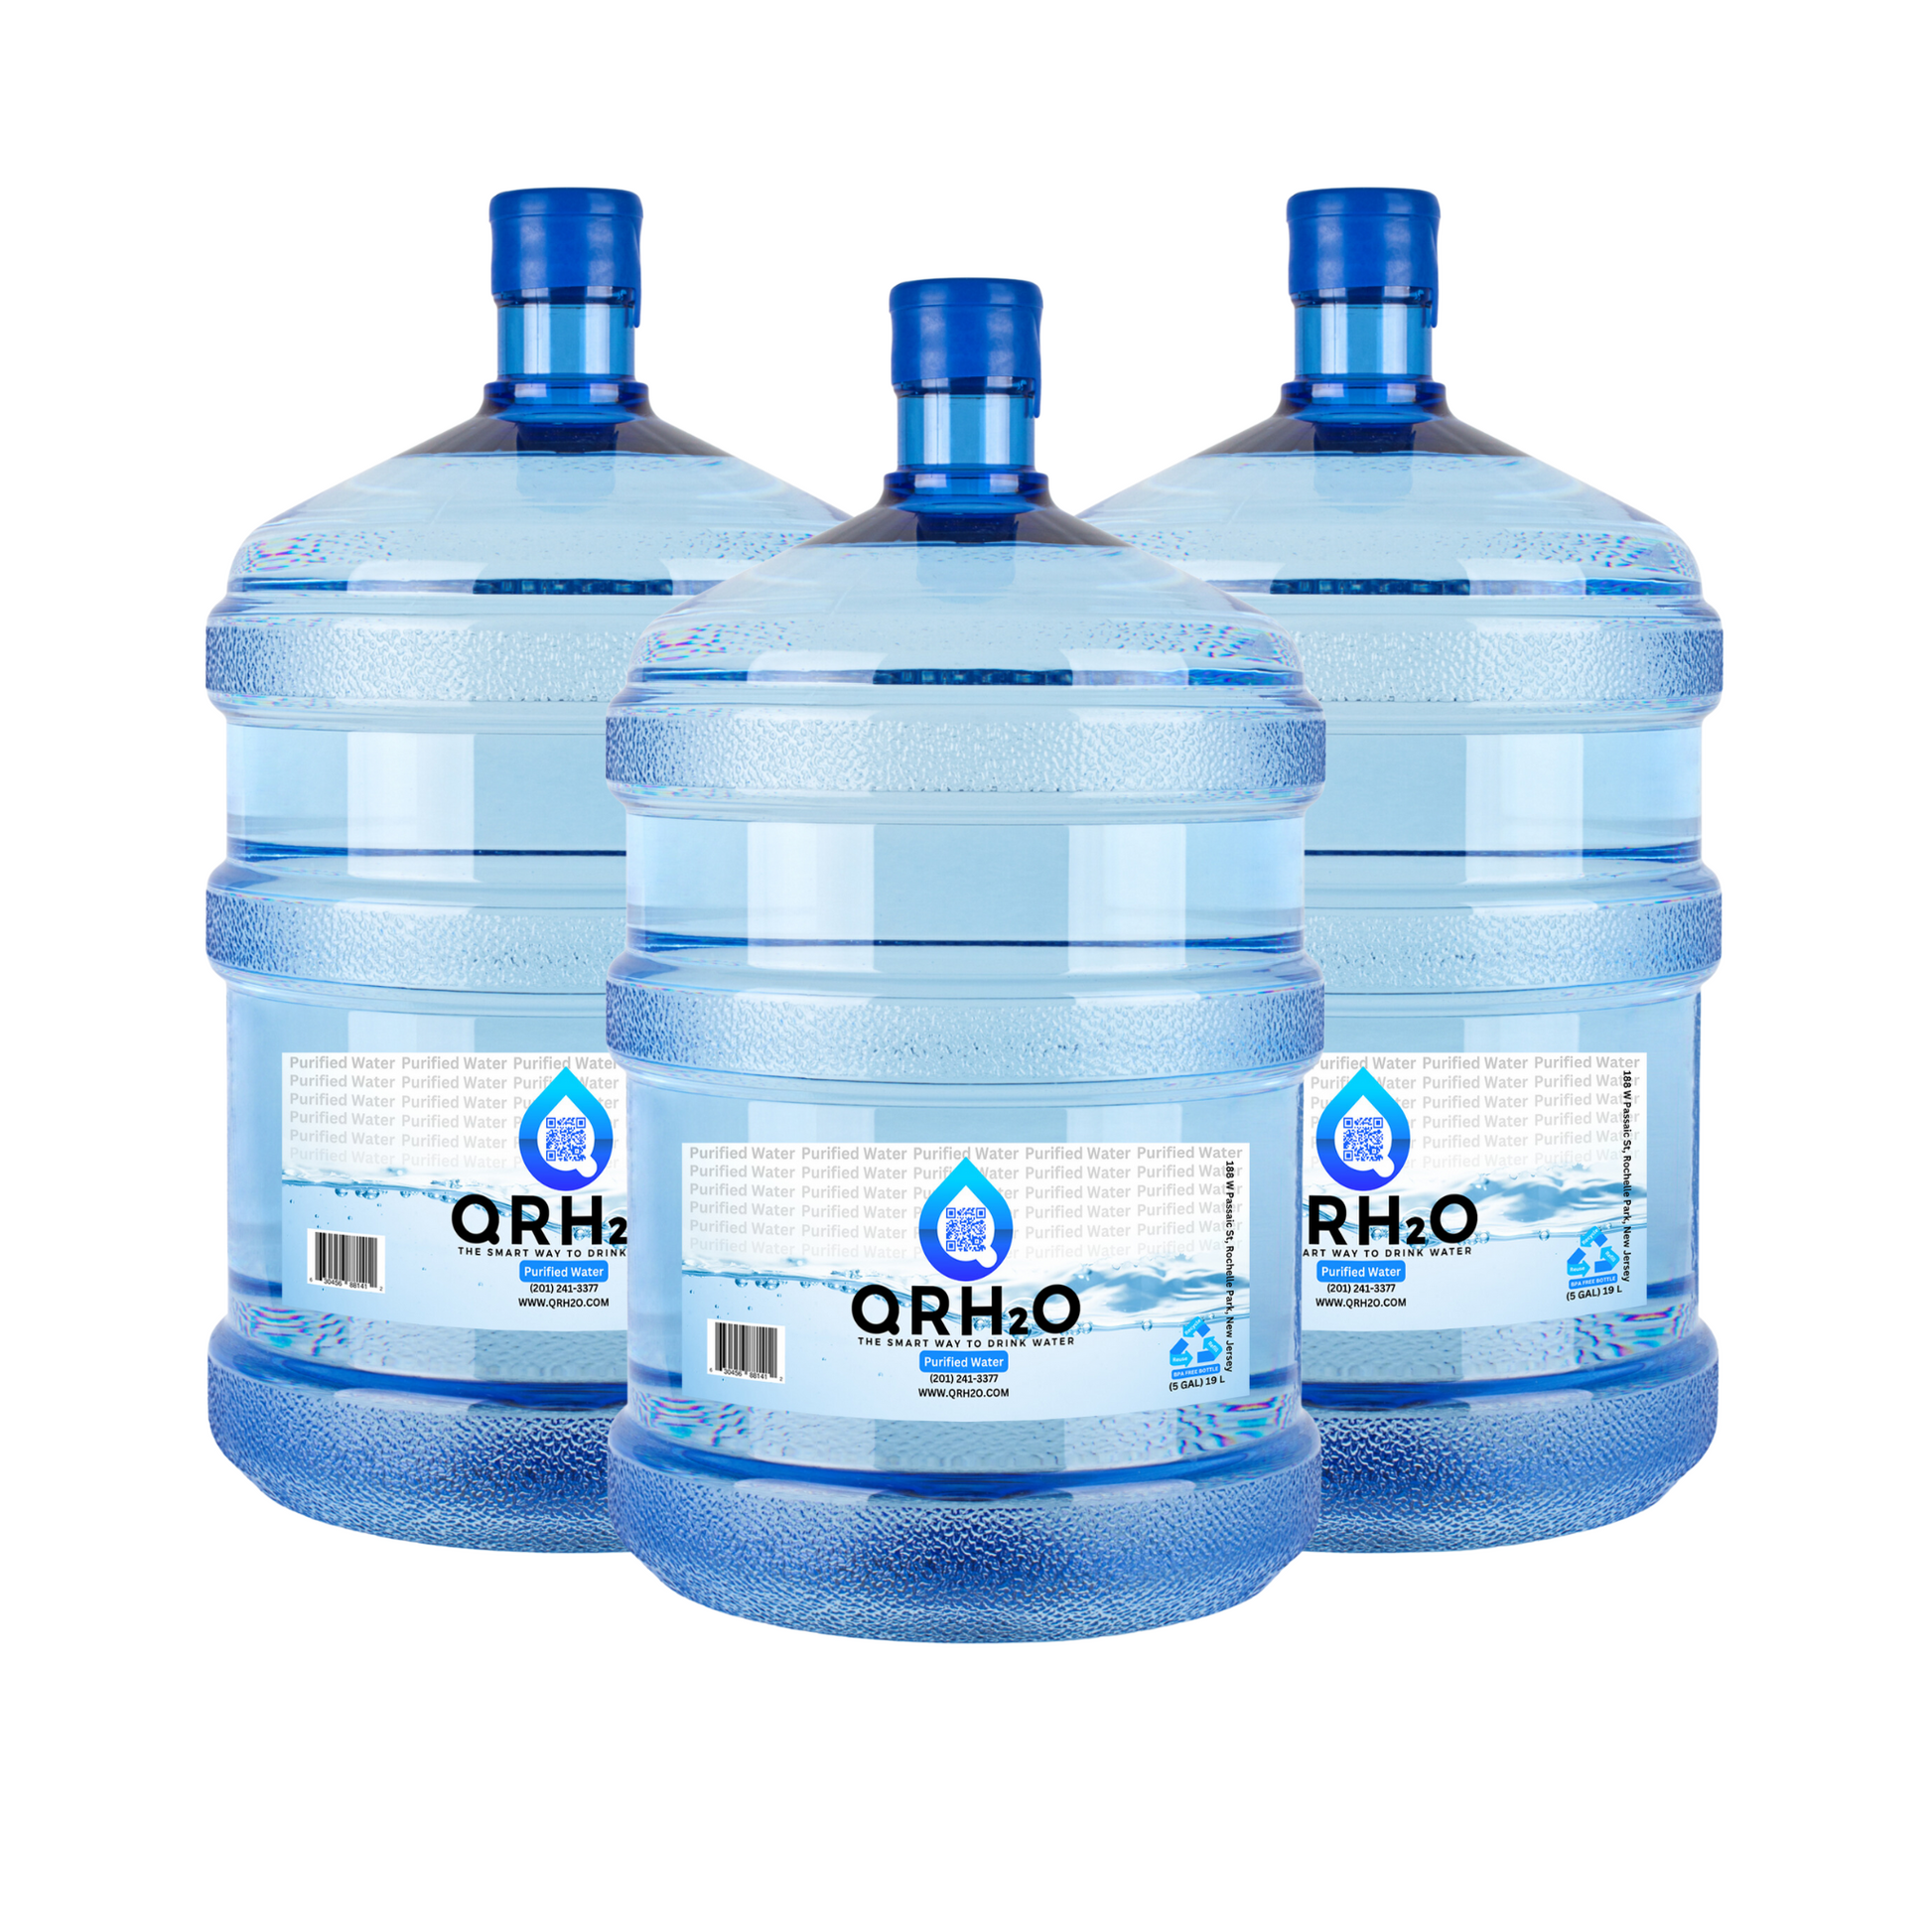 Hydrate with 5 Gallon Water Delivery